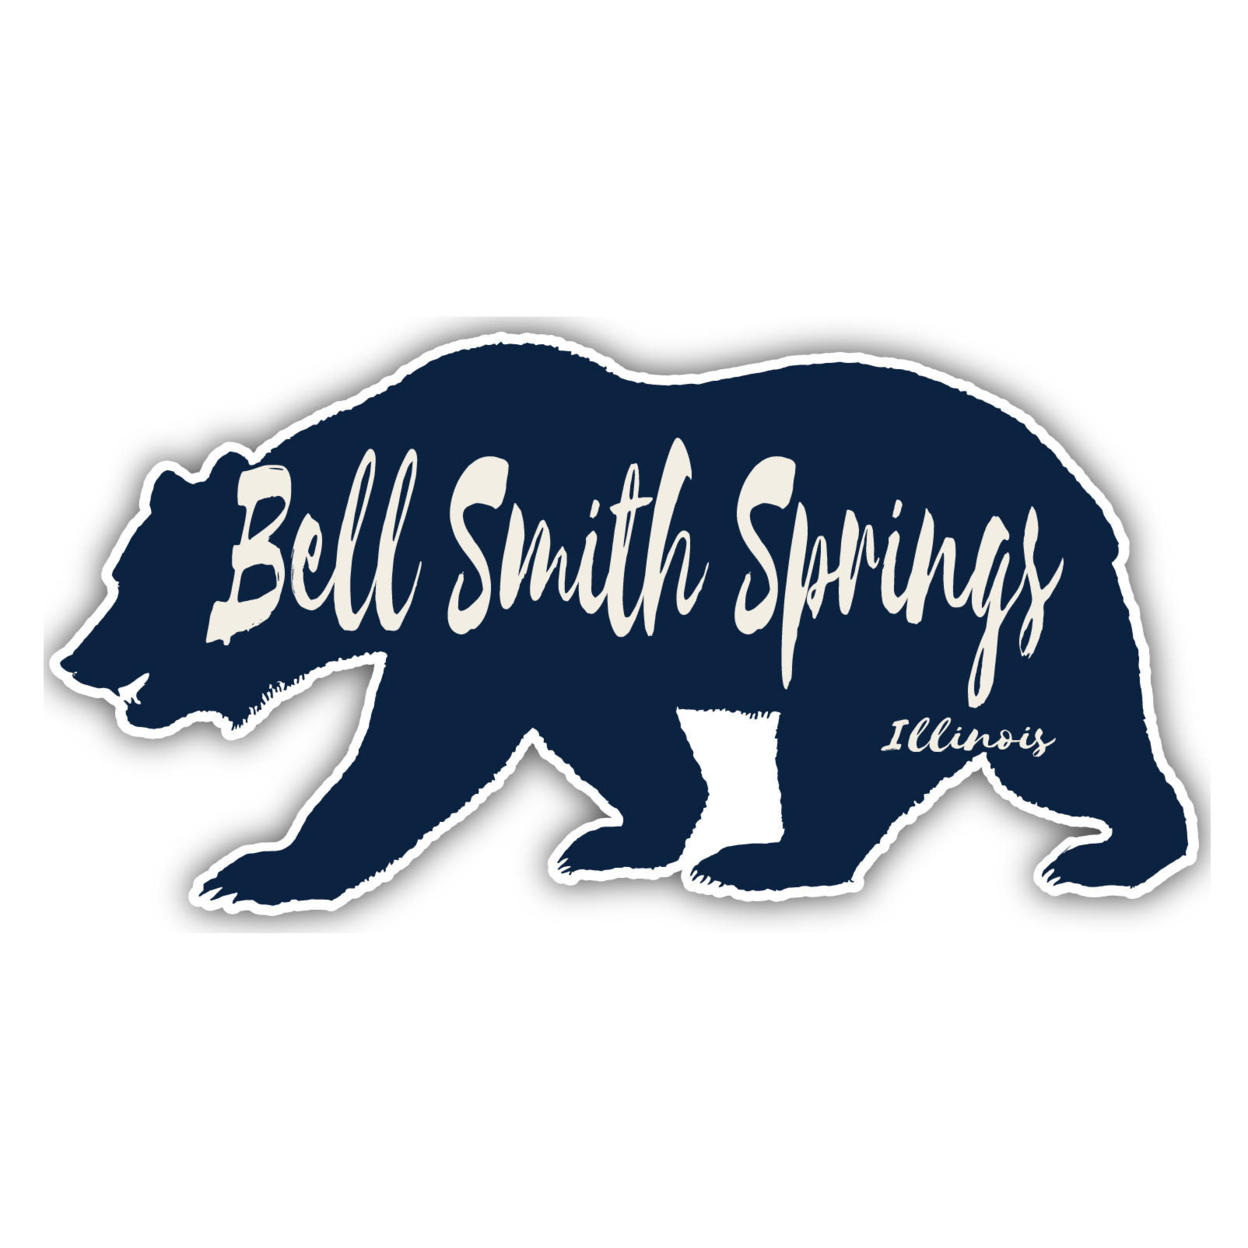 Bell Smith Springs Illinois Souvenir Decorative Stickers (Choose Theme And Size) - Single Unit, 6-Inch, Bear